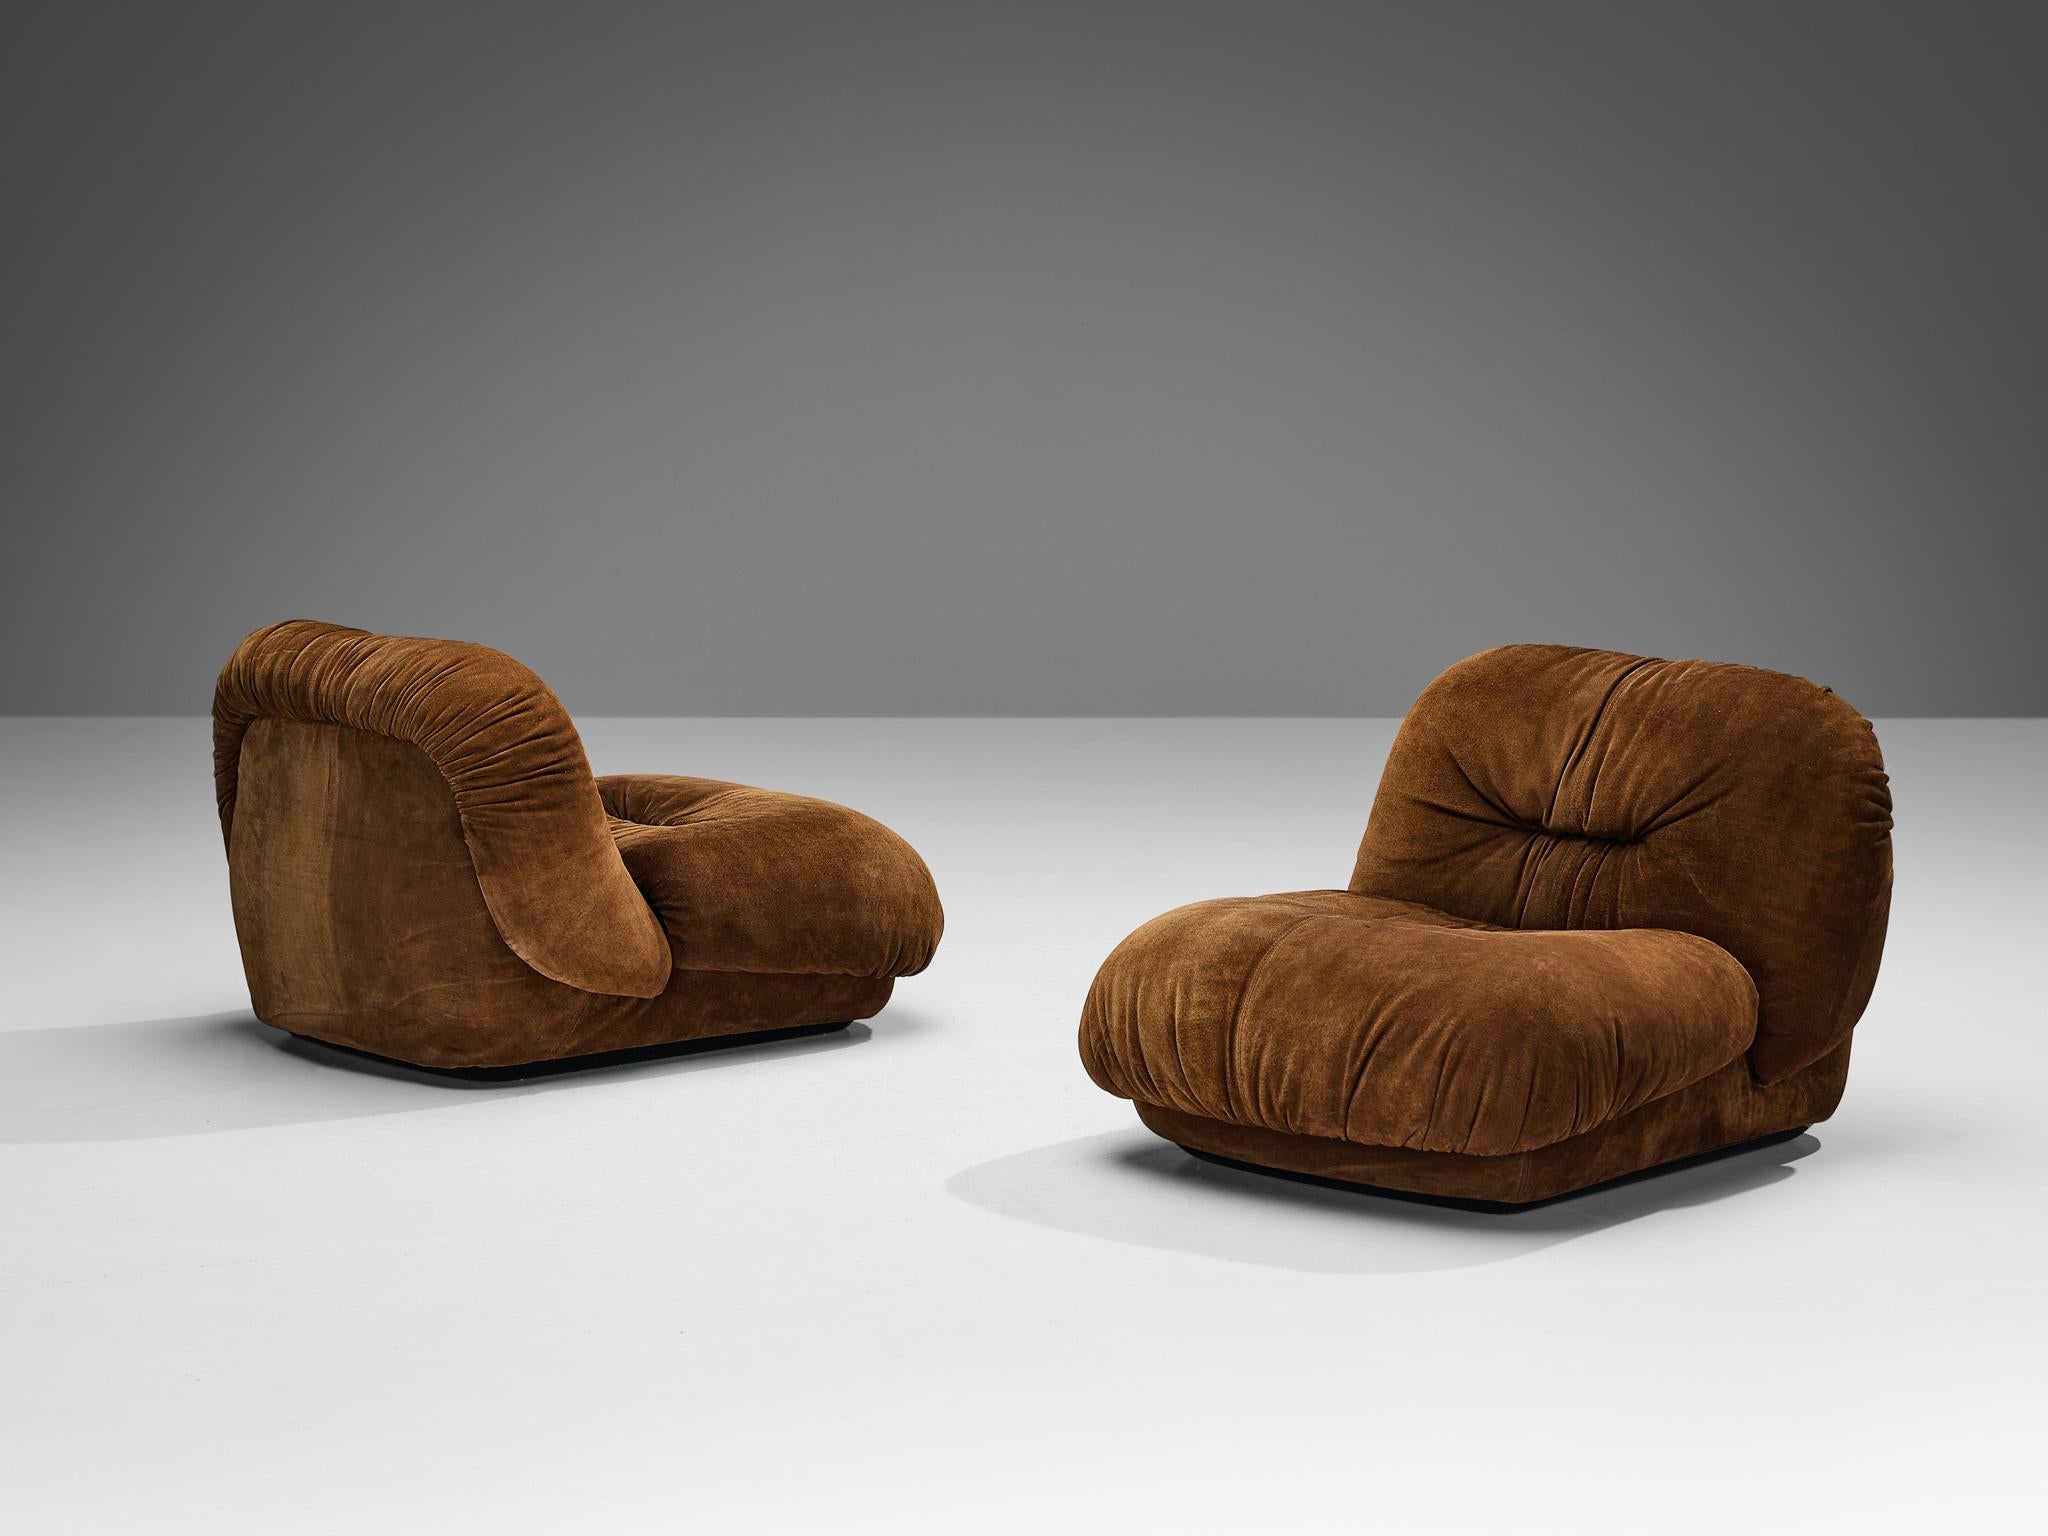 Alberto Rosselli for Saporiti, pair of 'Maxijumbo' lounge chairs, suede, ABS plastic, Italy, 1970s 

Extremely comfortable pair of lounge chairs designed by Alberto Rosselli for Saporiti.  These chairs are made to reach an ultimate level of comfort